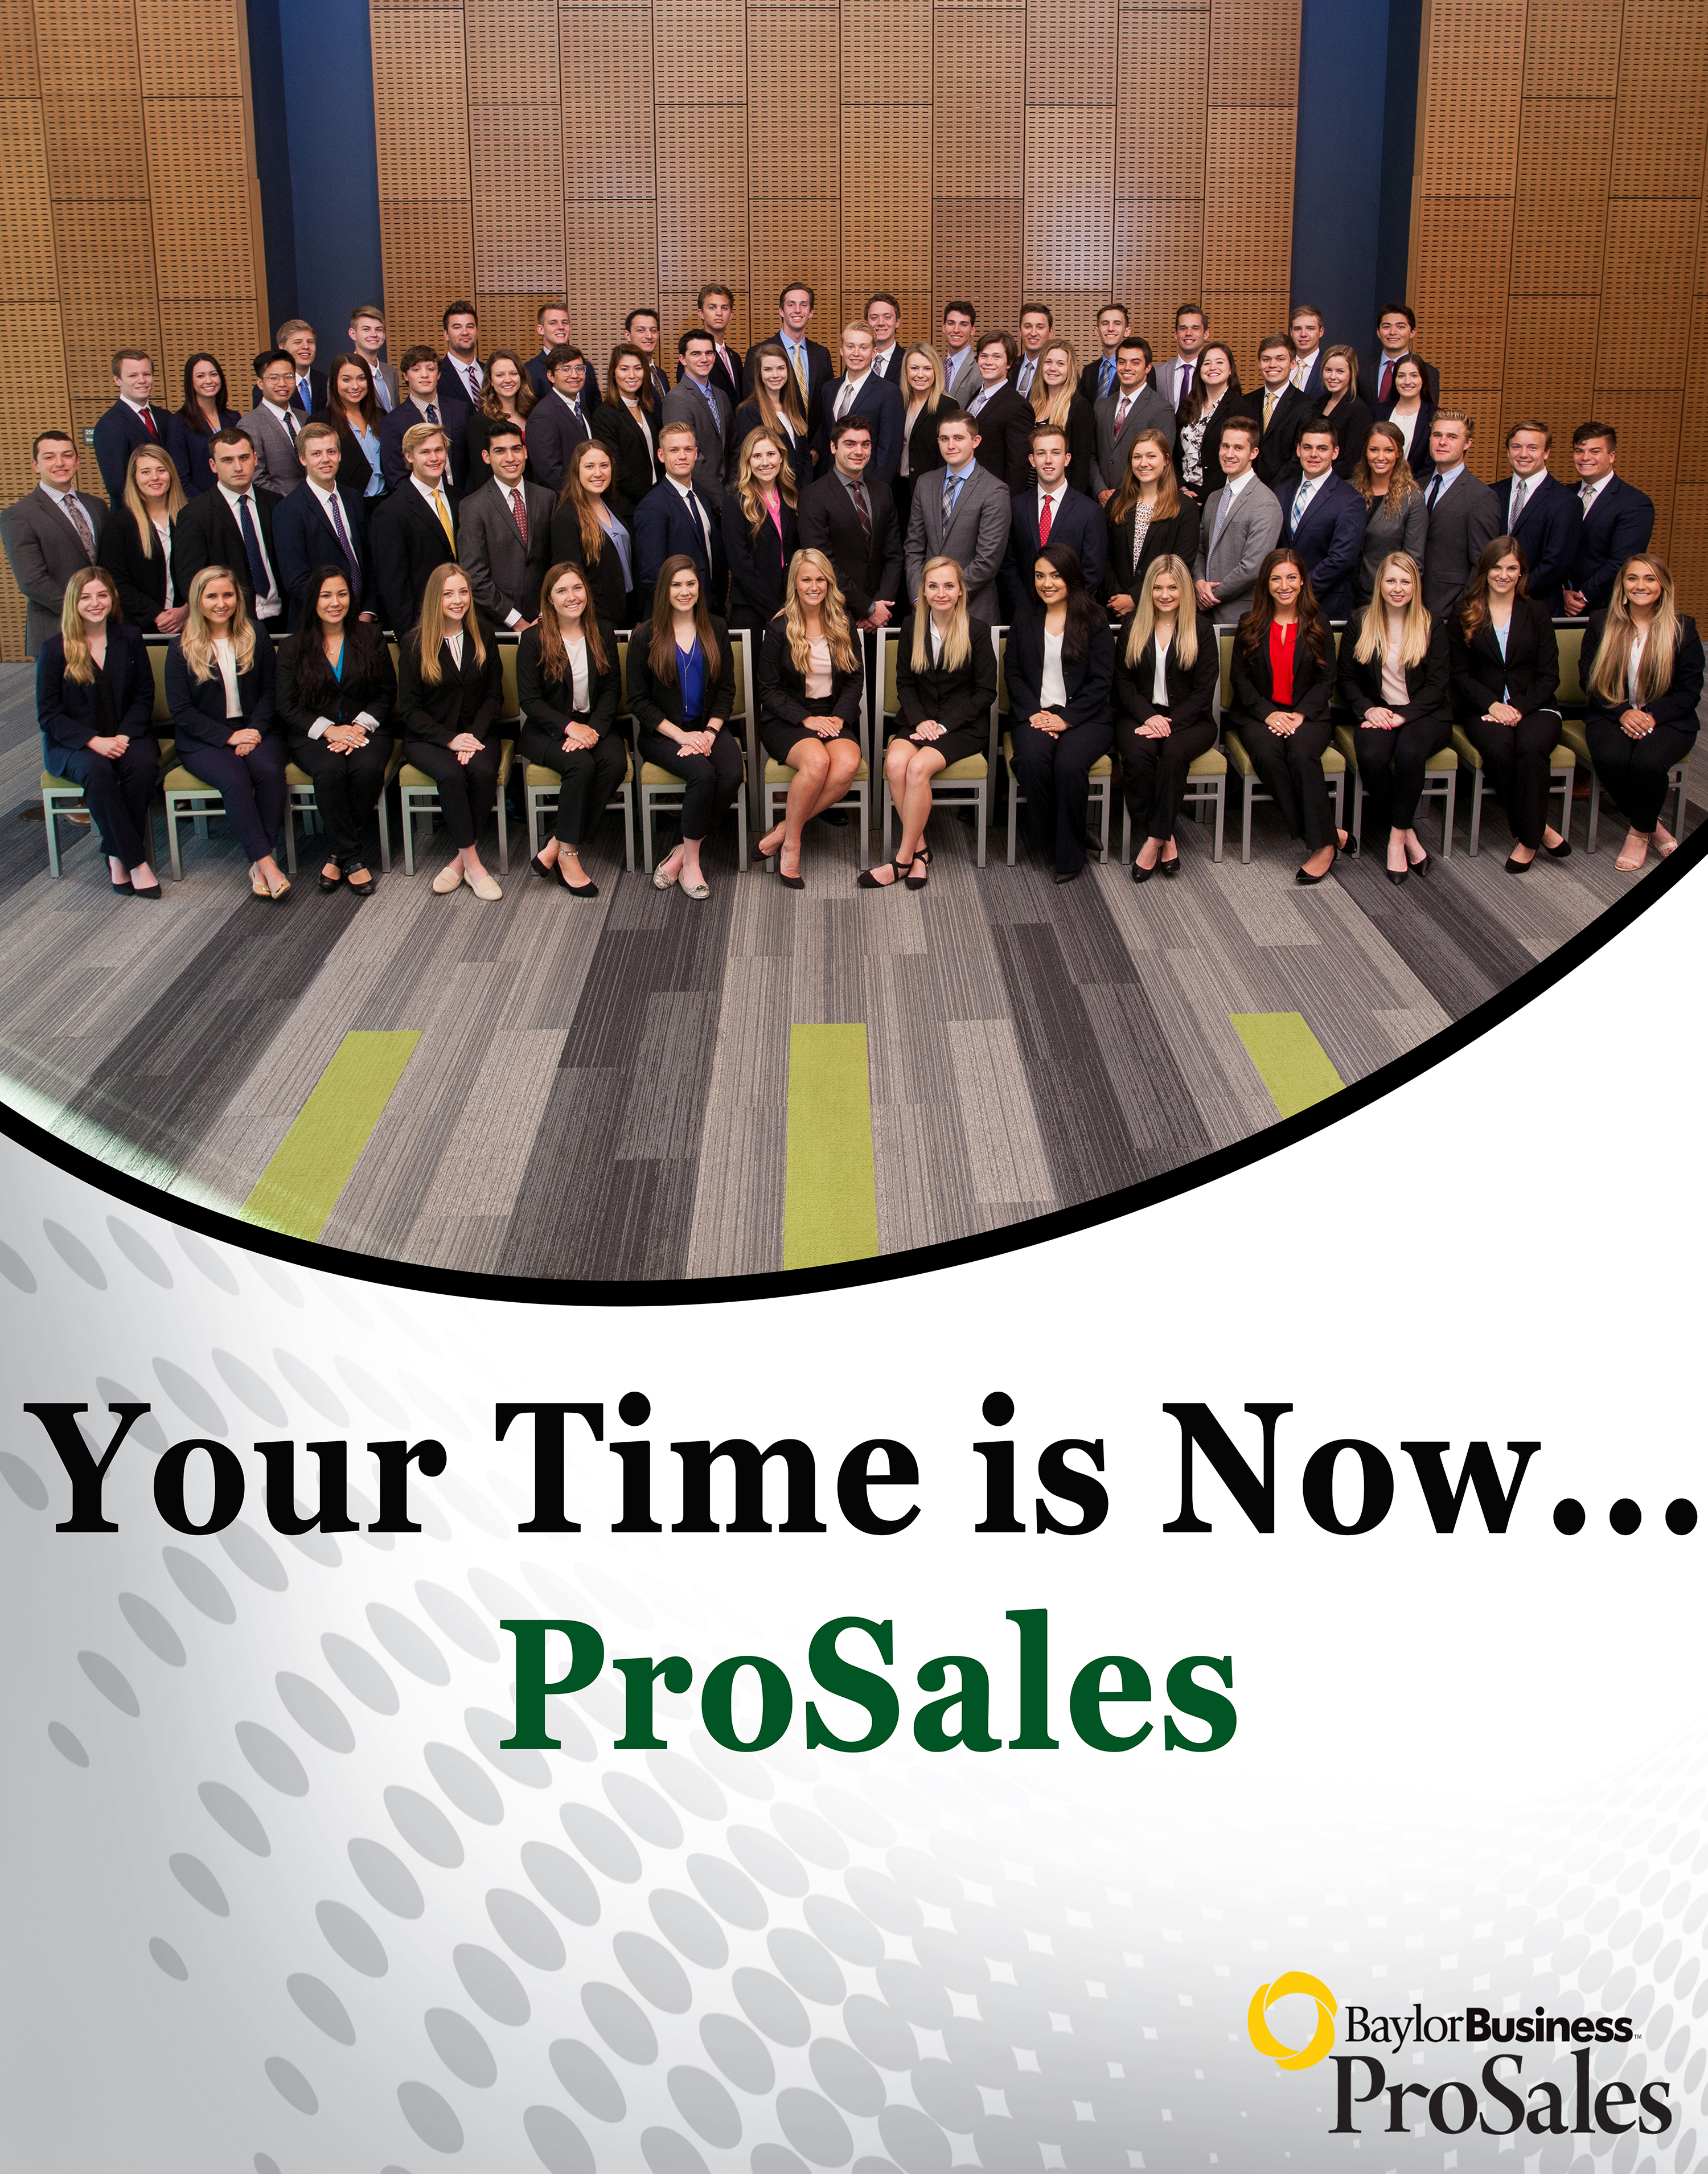 Your Time is Now - ProSales